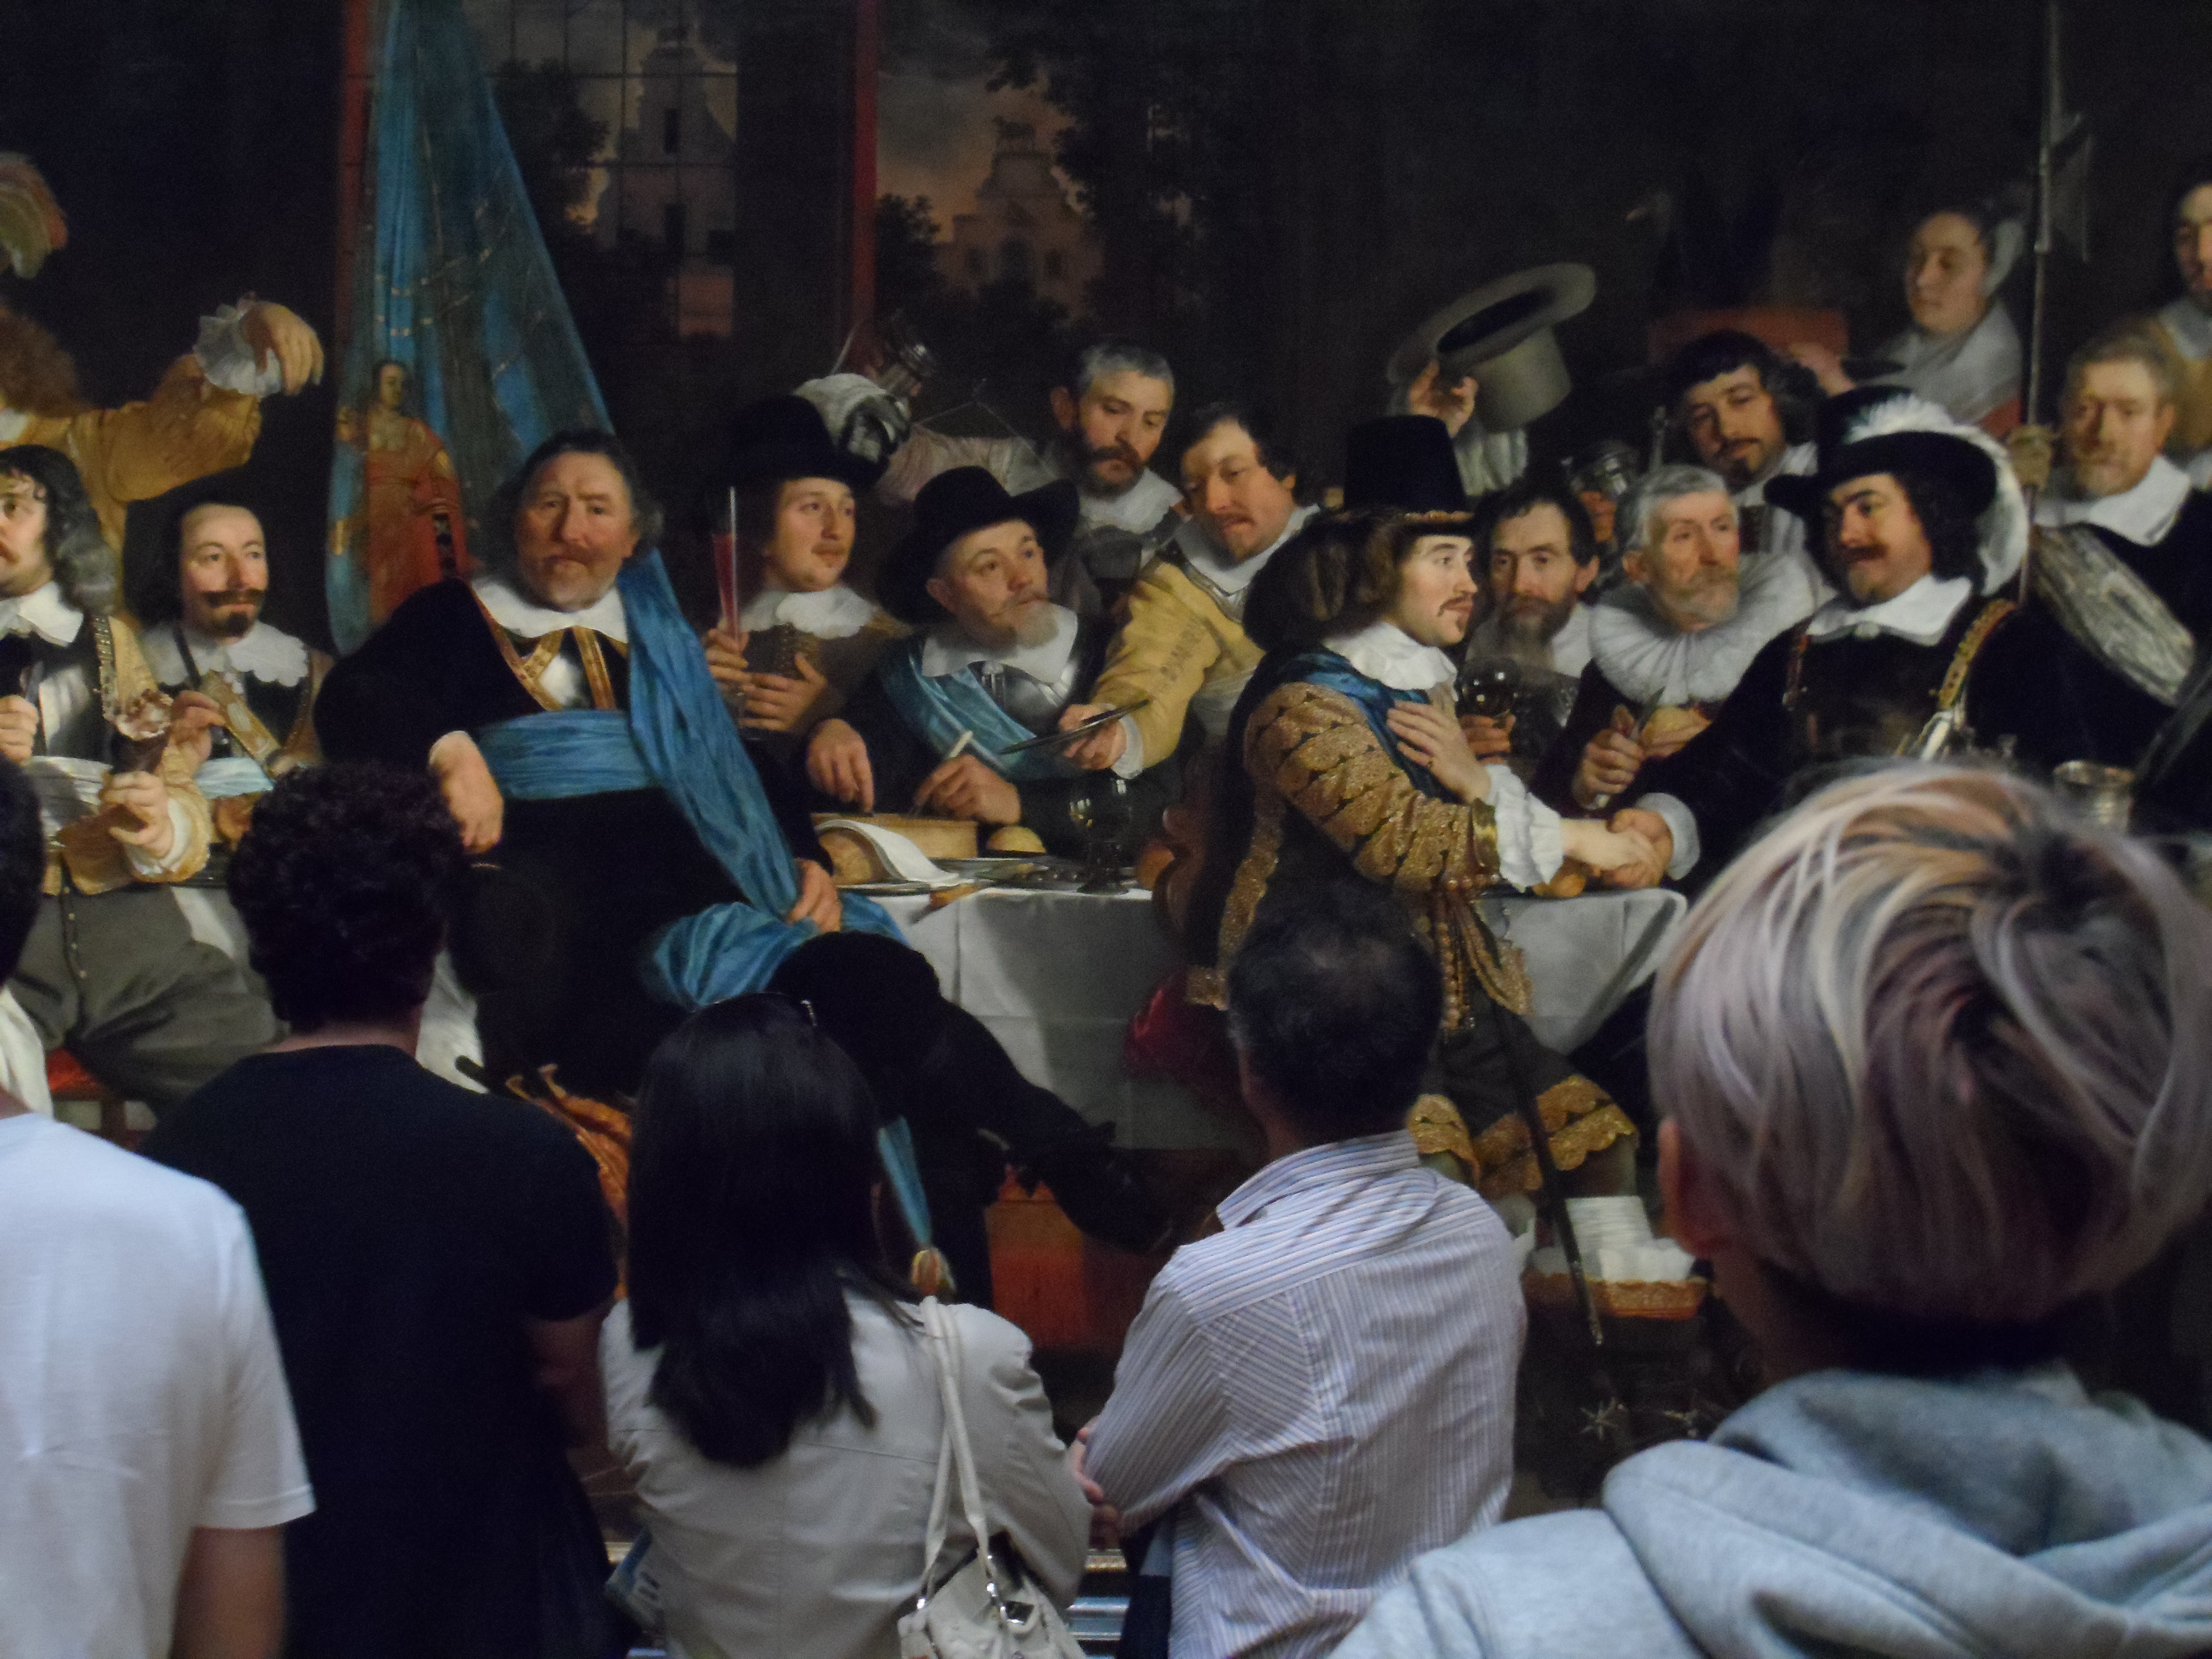 Painting at the Rijksmuseum